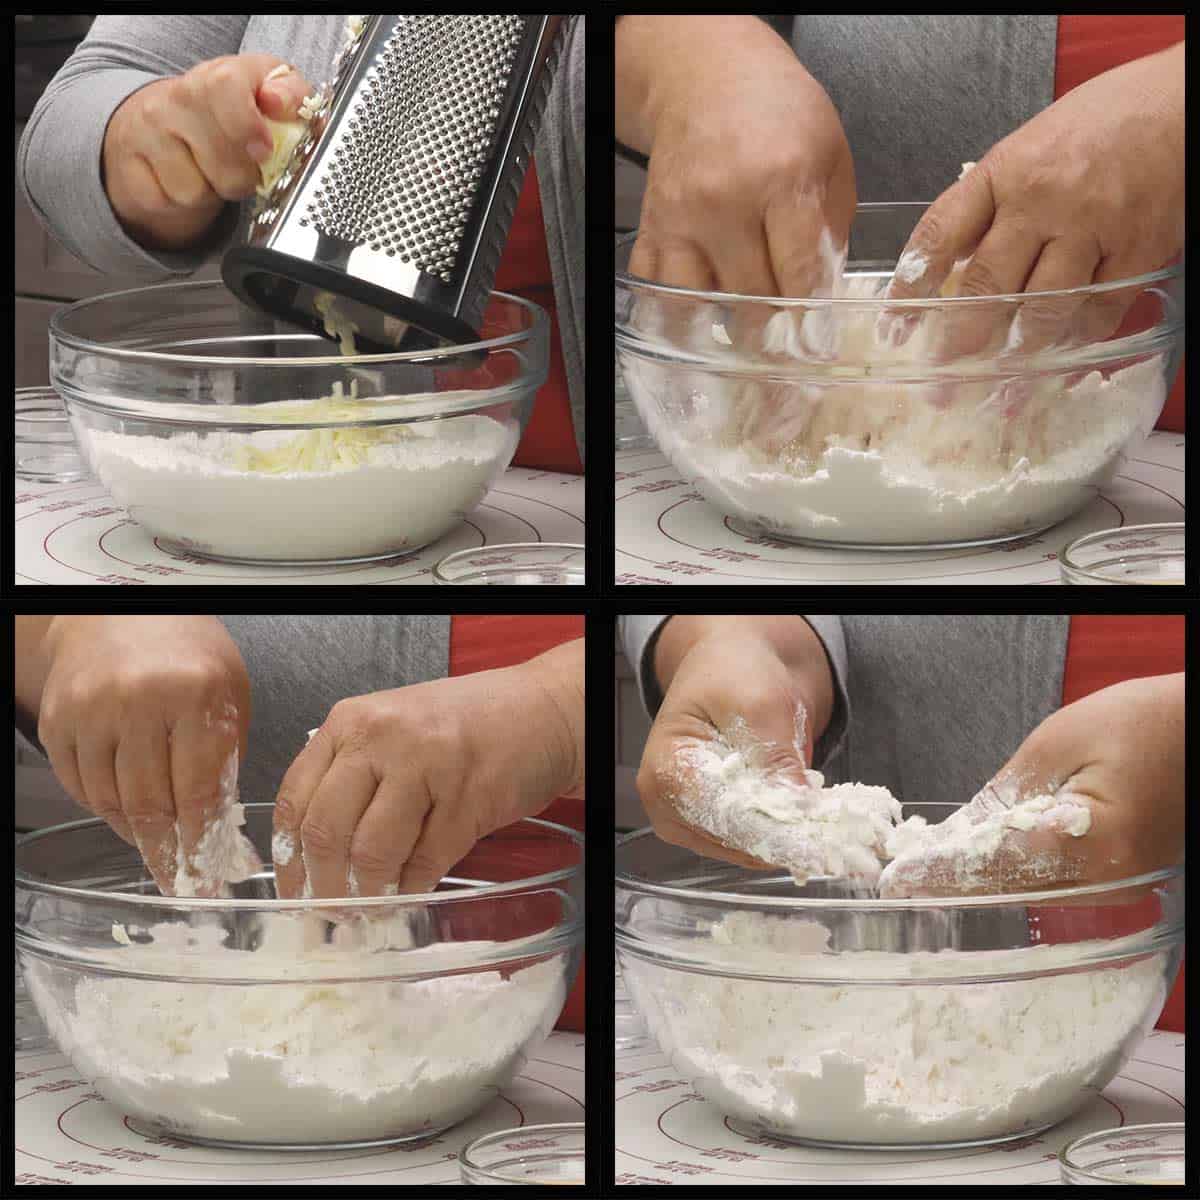 grating the butter into the flour mixture and mixing with hands.